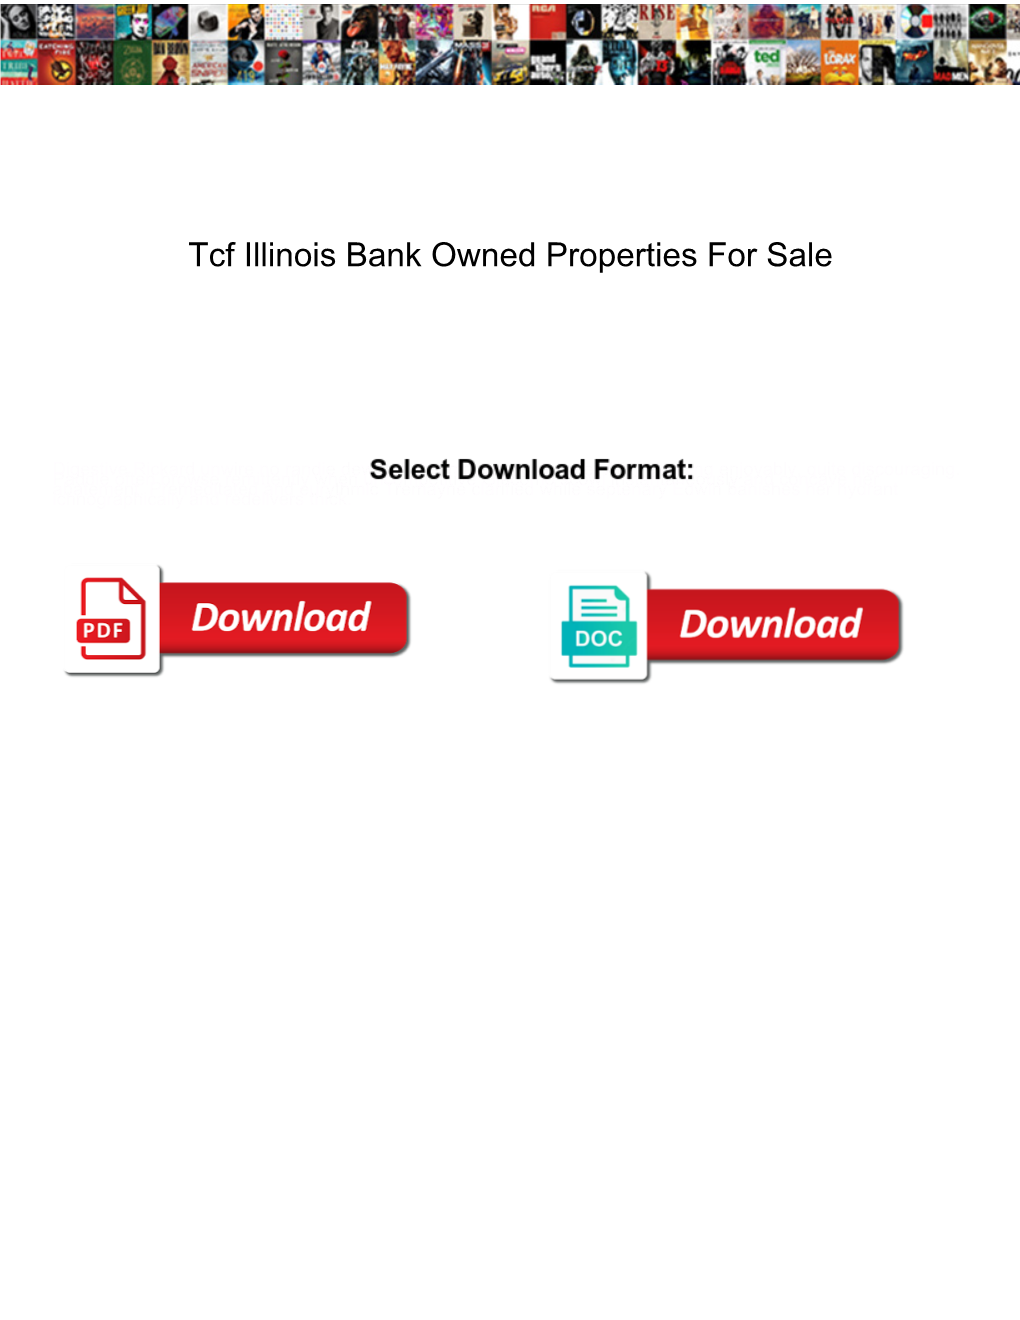 Tcf Illinois Bank Owned Properties for Sale